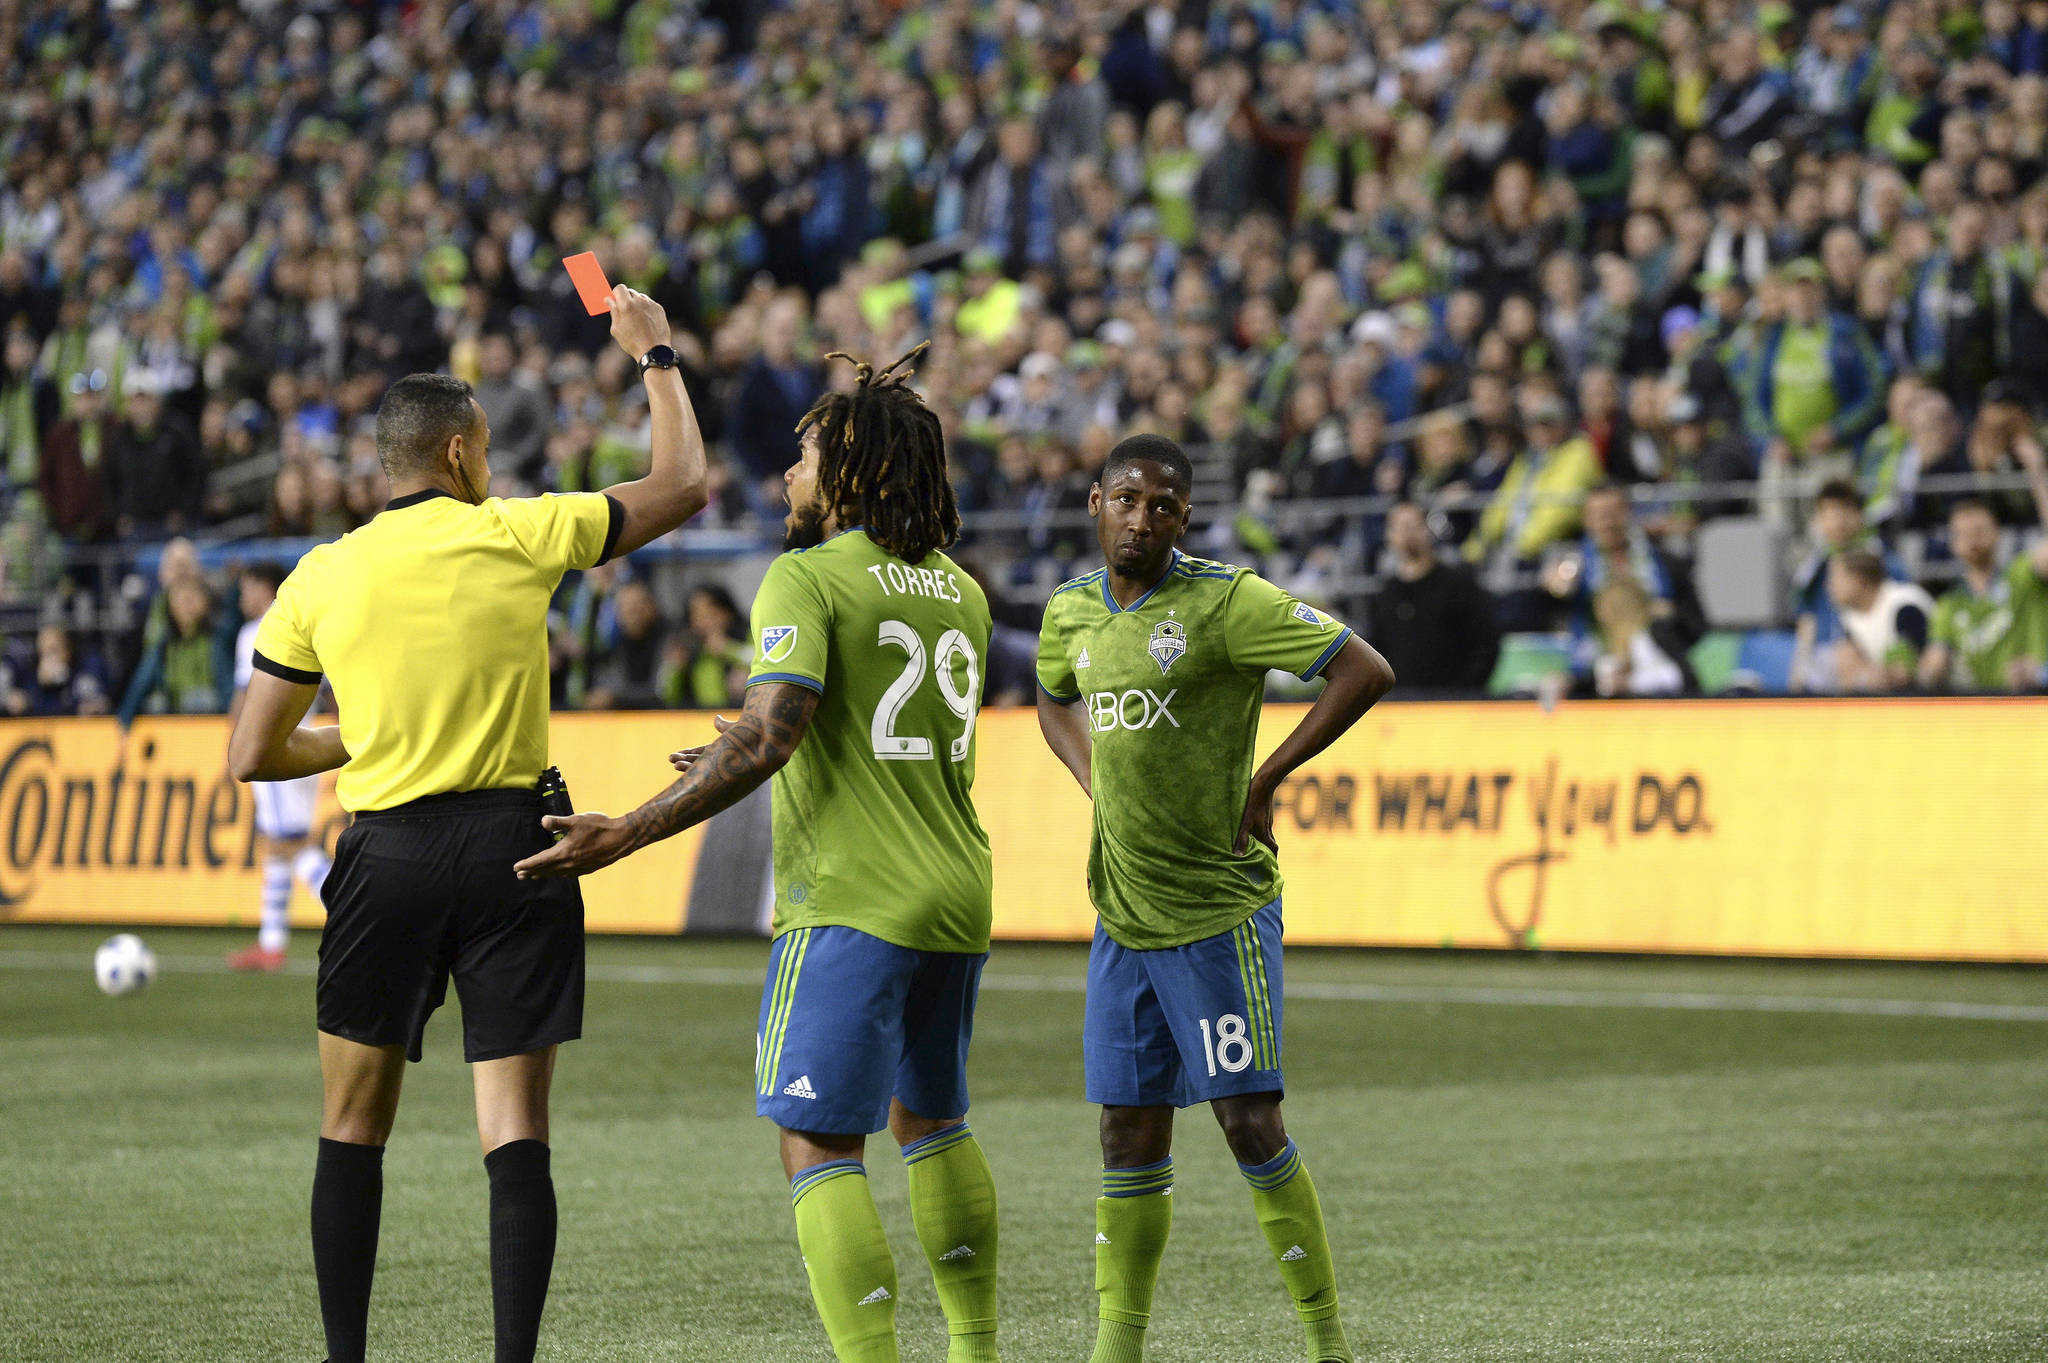 The whole Sounders season has felt like one long, unjust red card. Photo by Charis Wilson/Sounders FC